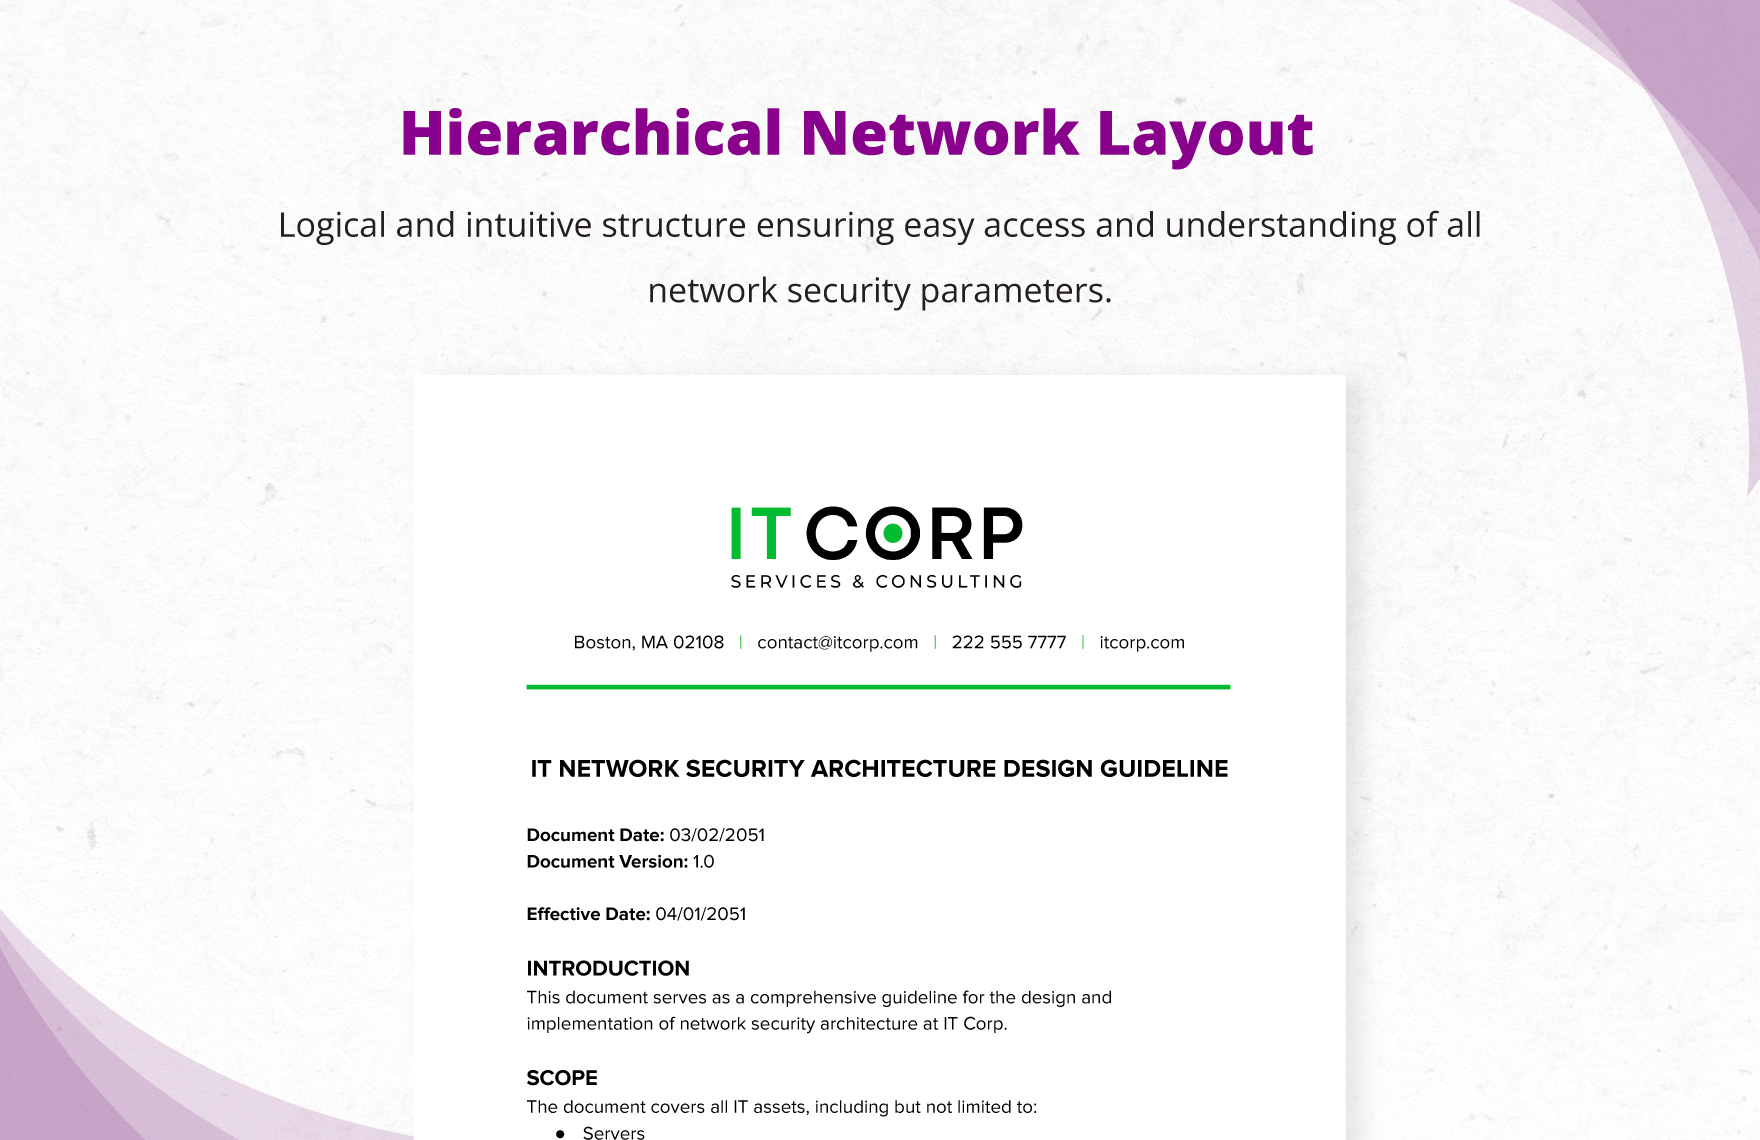 IT Network Security Architecture Design Guideline Template